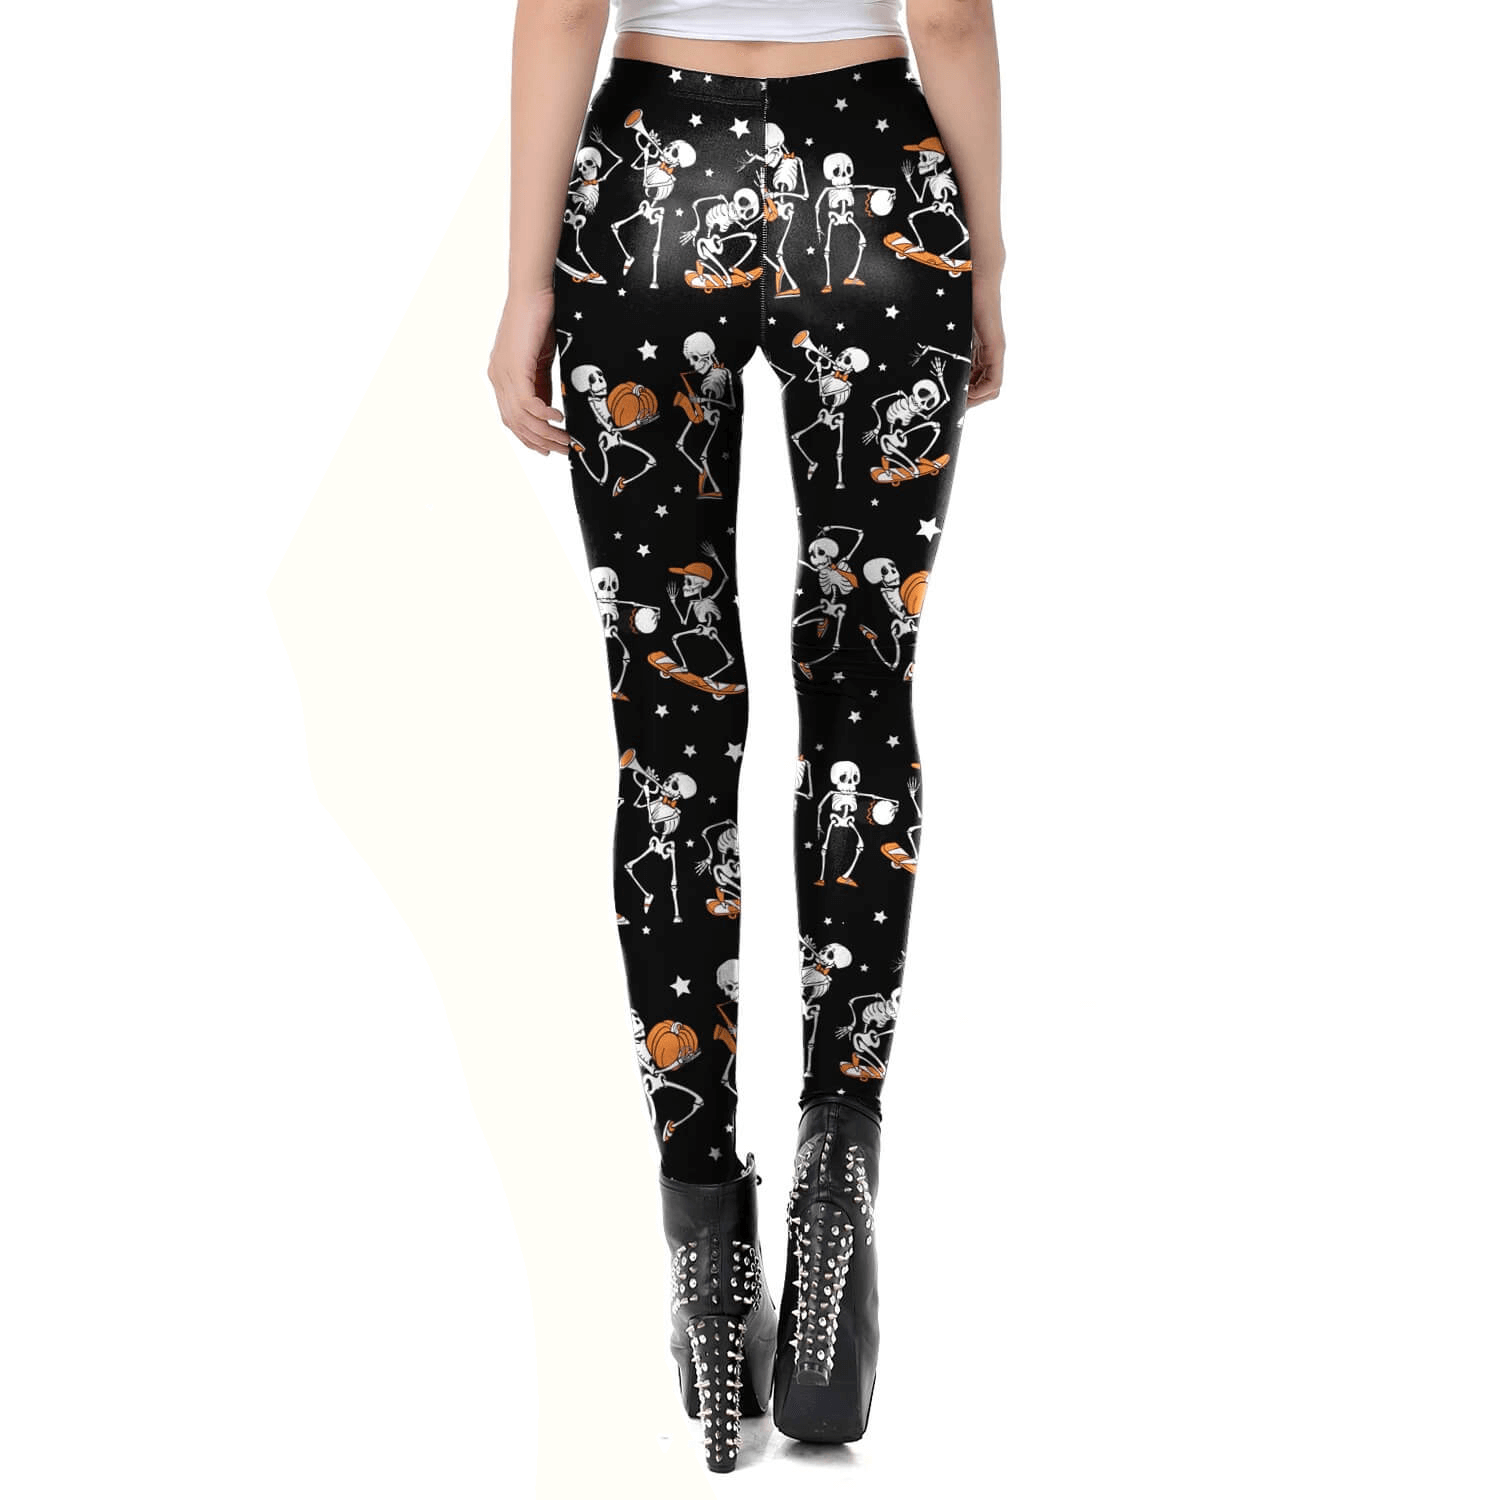 Black Classic Female Leggings with Skulls and Pumpkins for Halloween / Sexy Workout Pants for Women - HARD'N'HEAVY